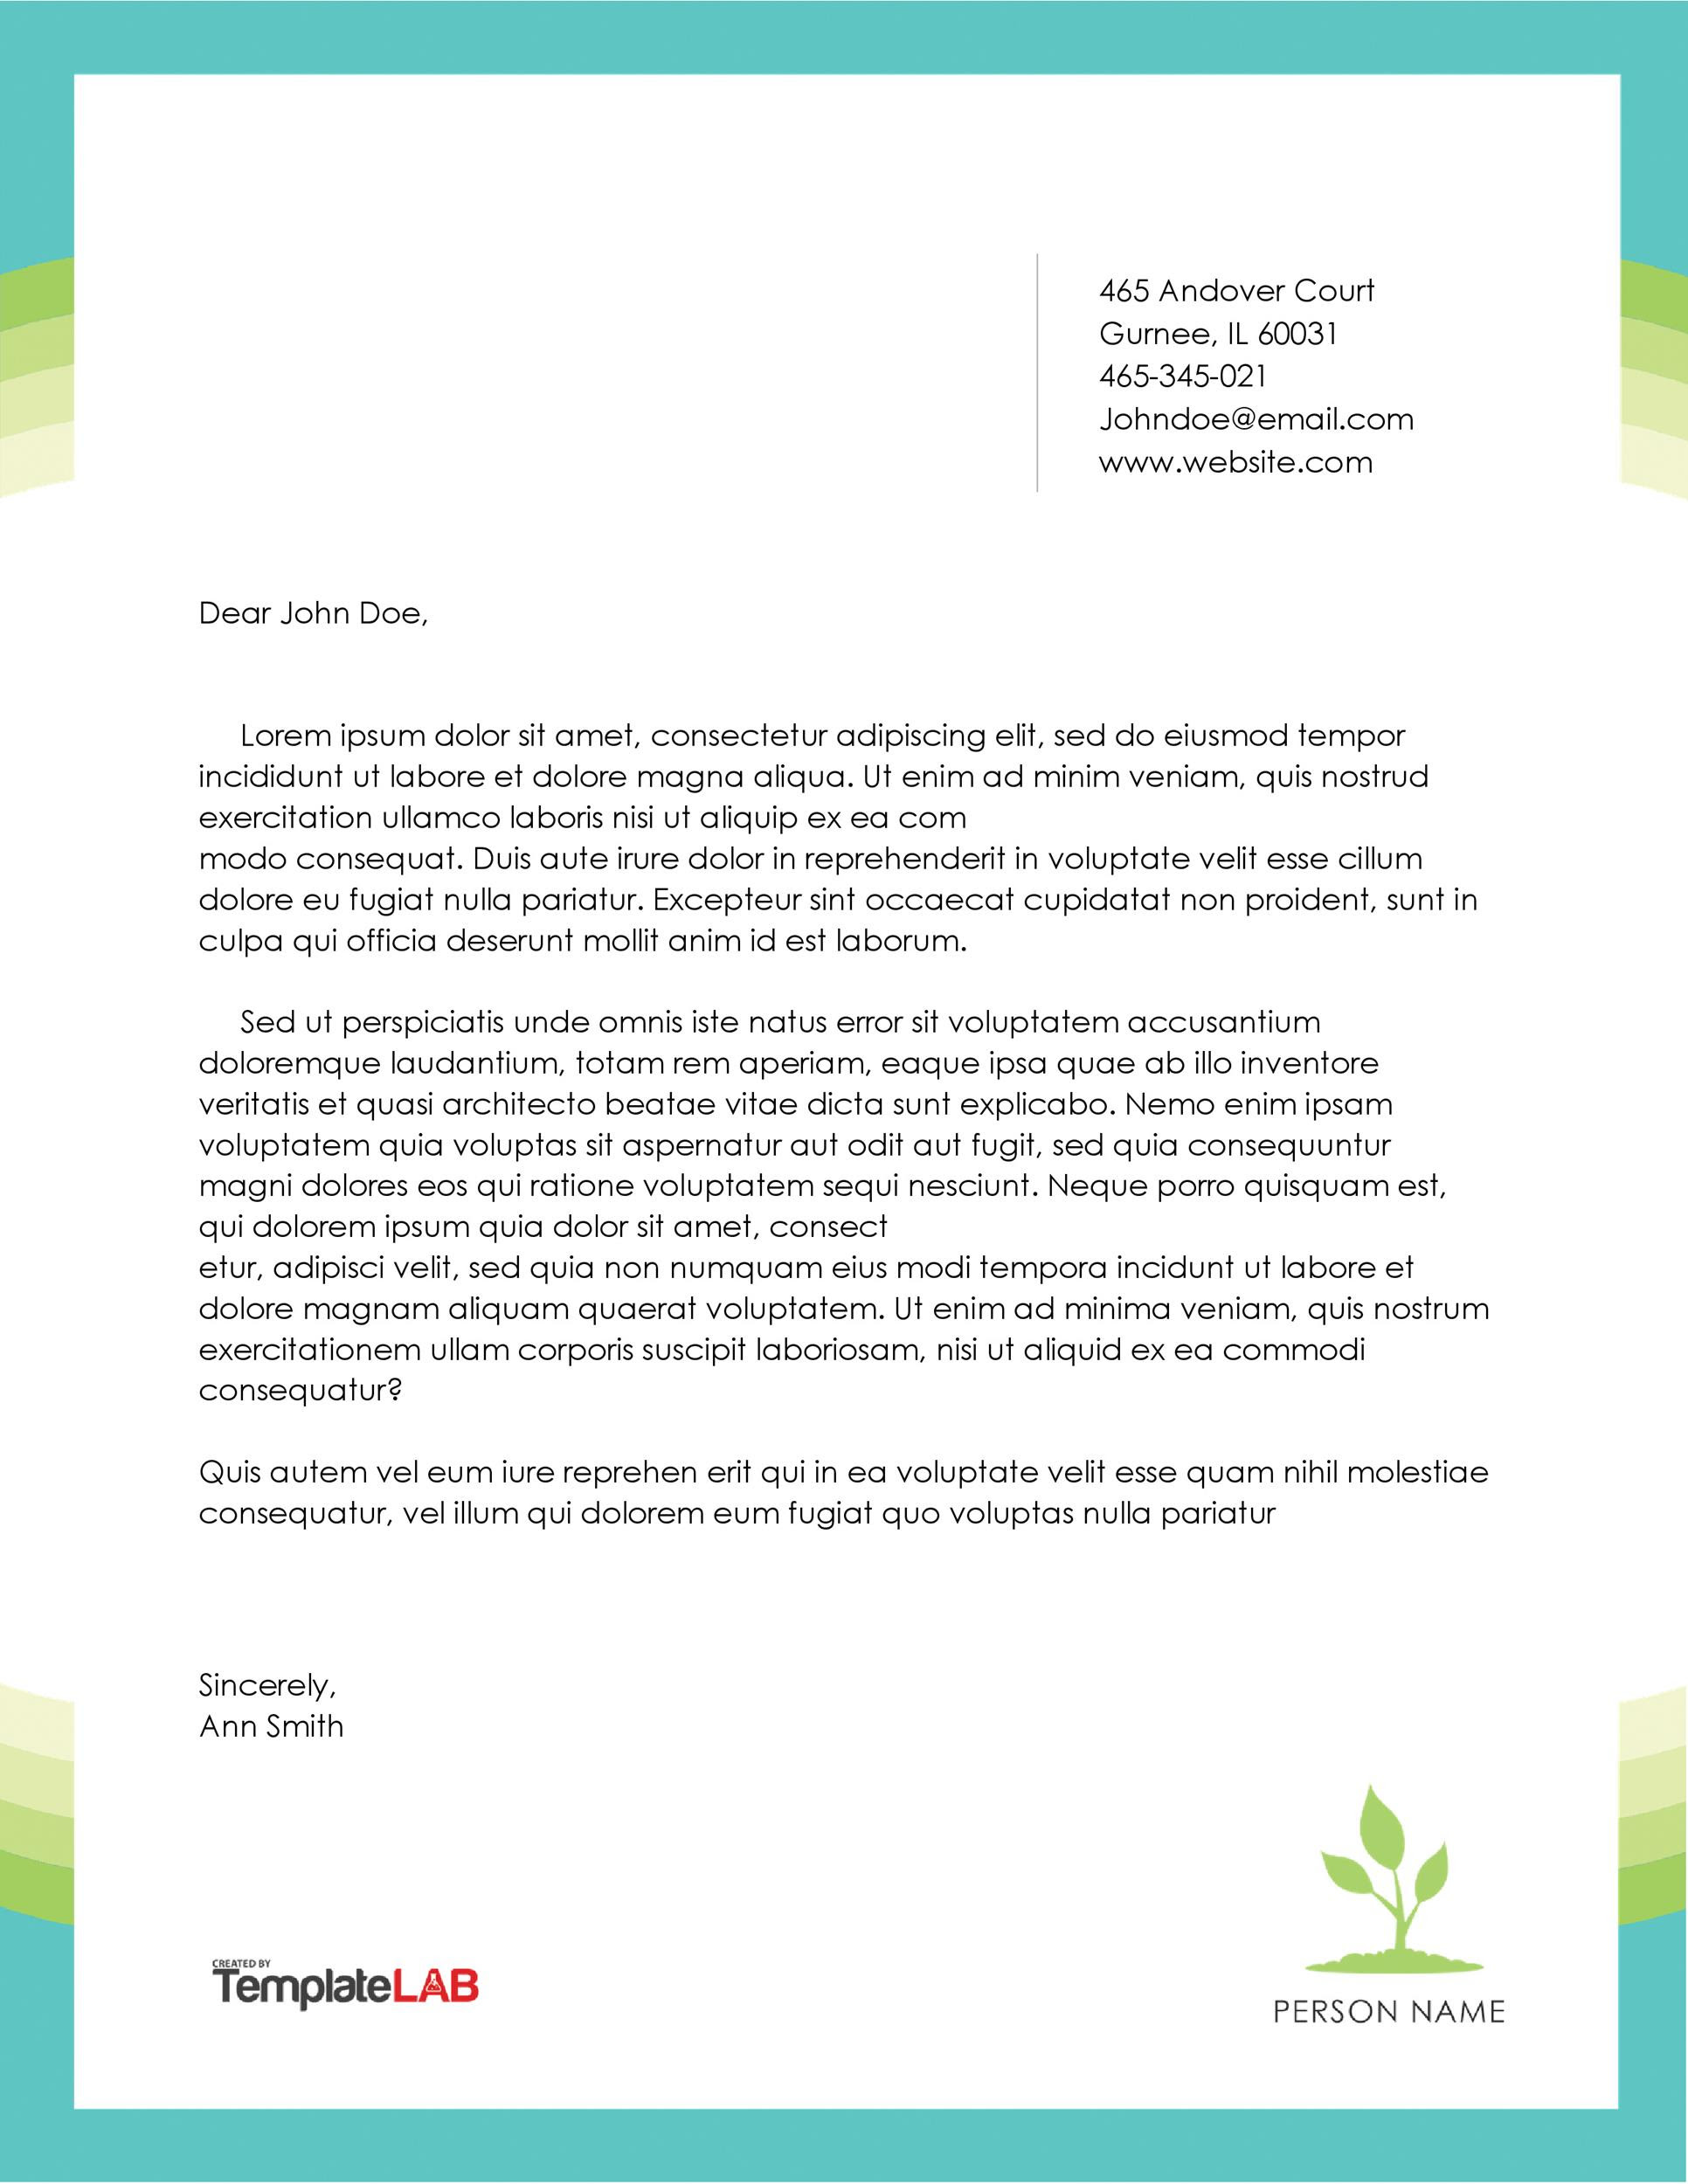 Personal Letter Head Format : A personal letterhead is a header Regarding Personal Letterhead Templates